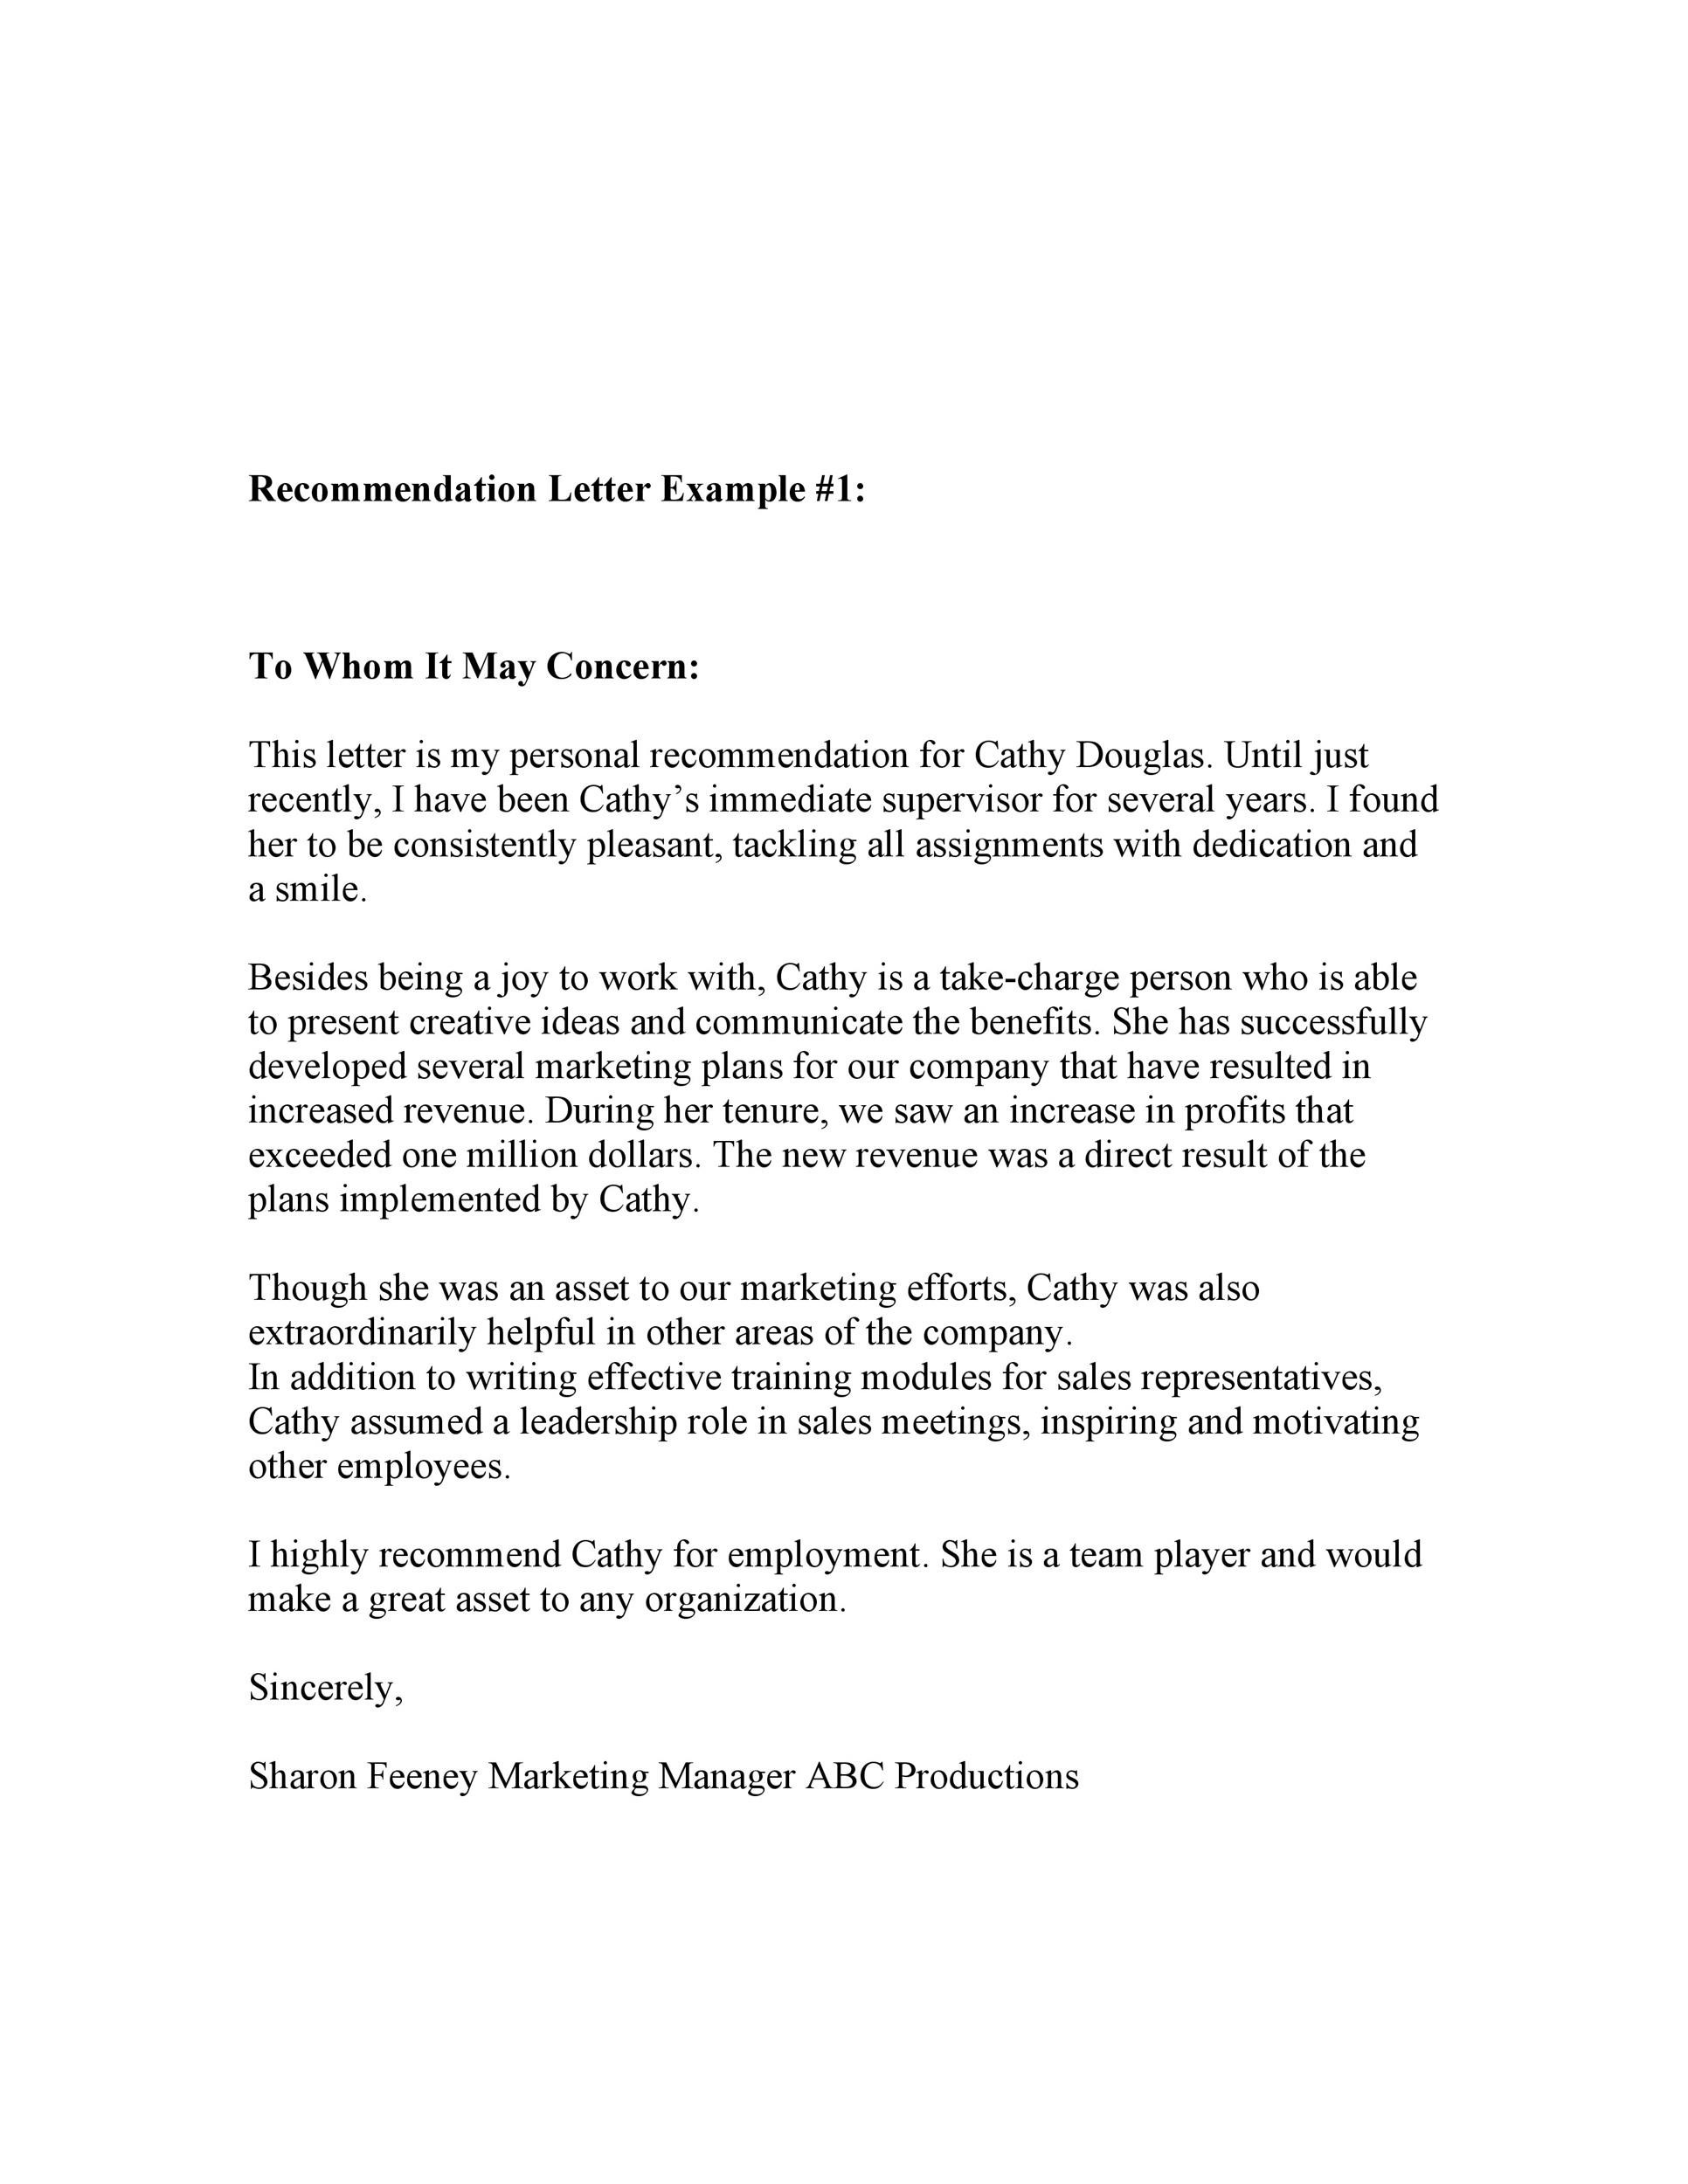 Reference Letter Format To Whom It May Concern | Letter ...